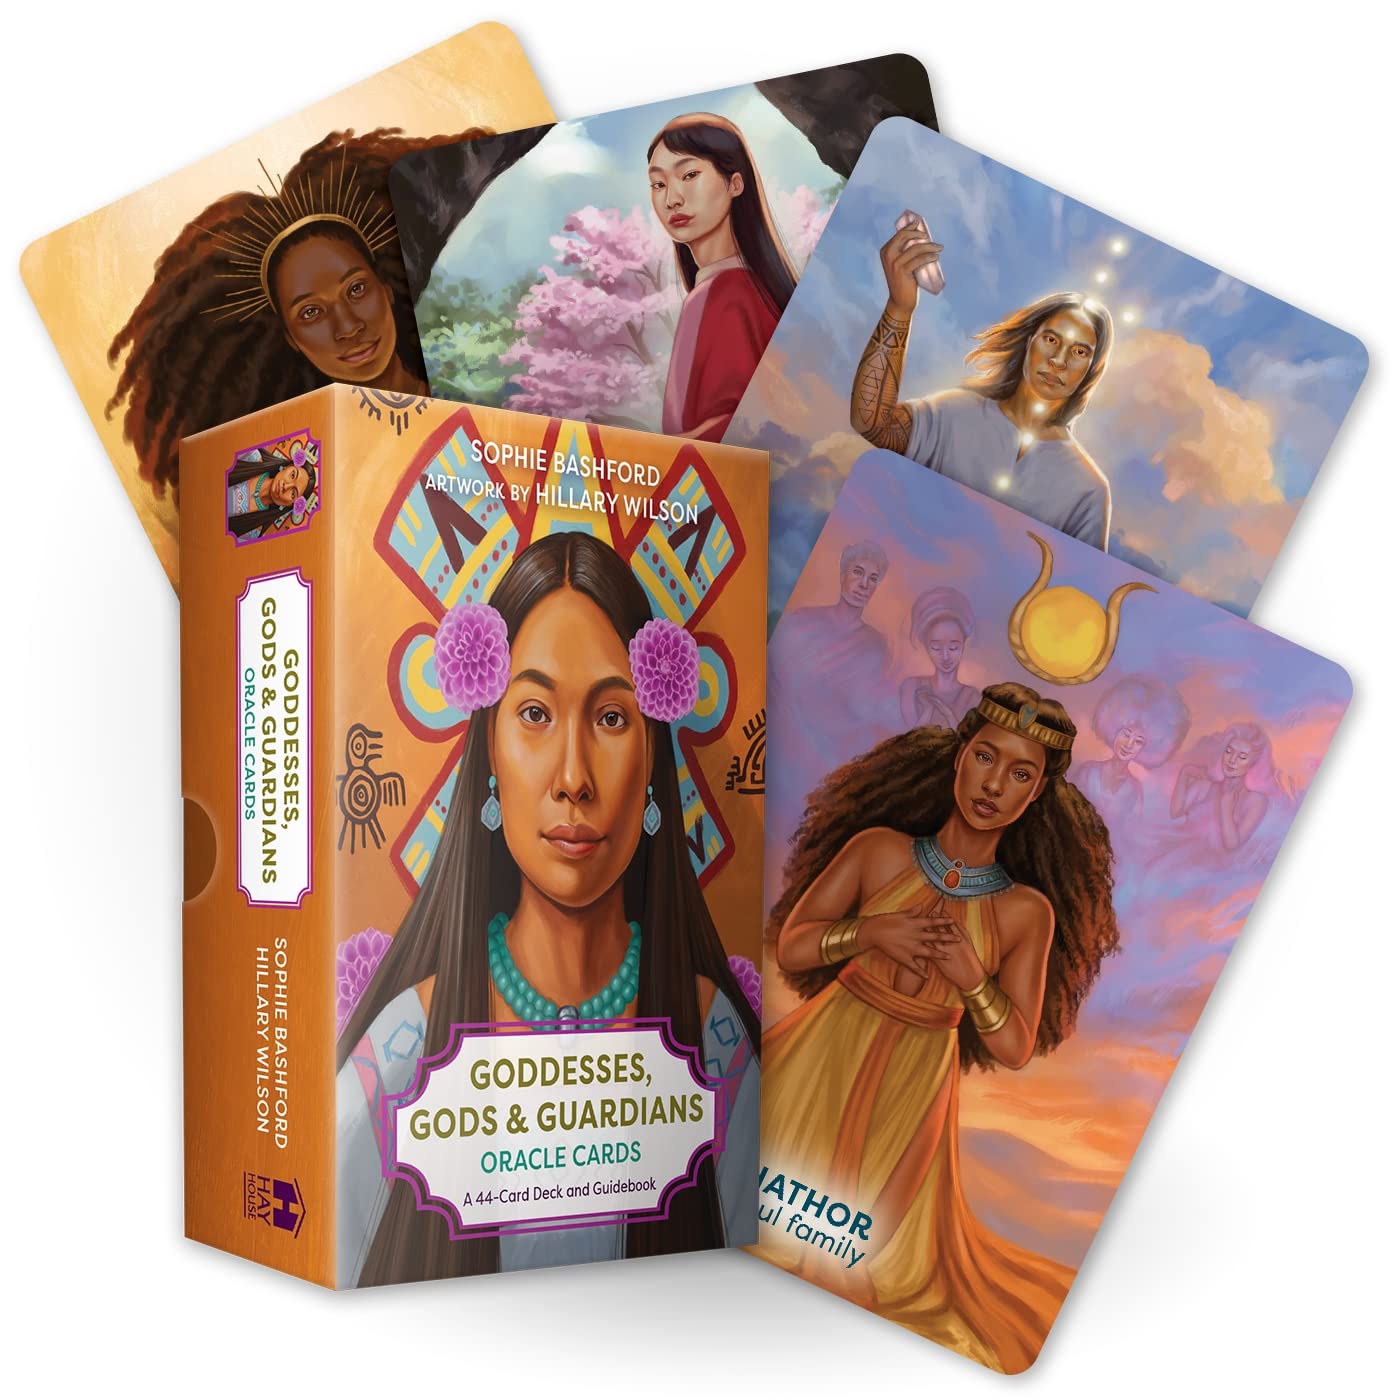 Goddesses, Gods and Guardians Oracle Cards